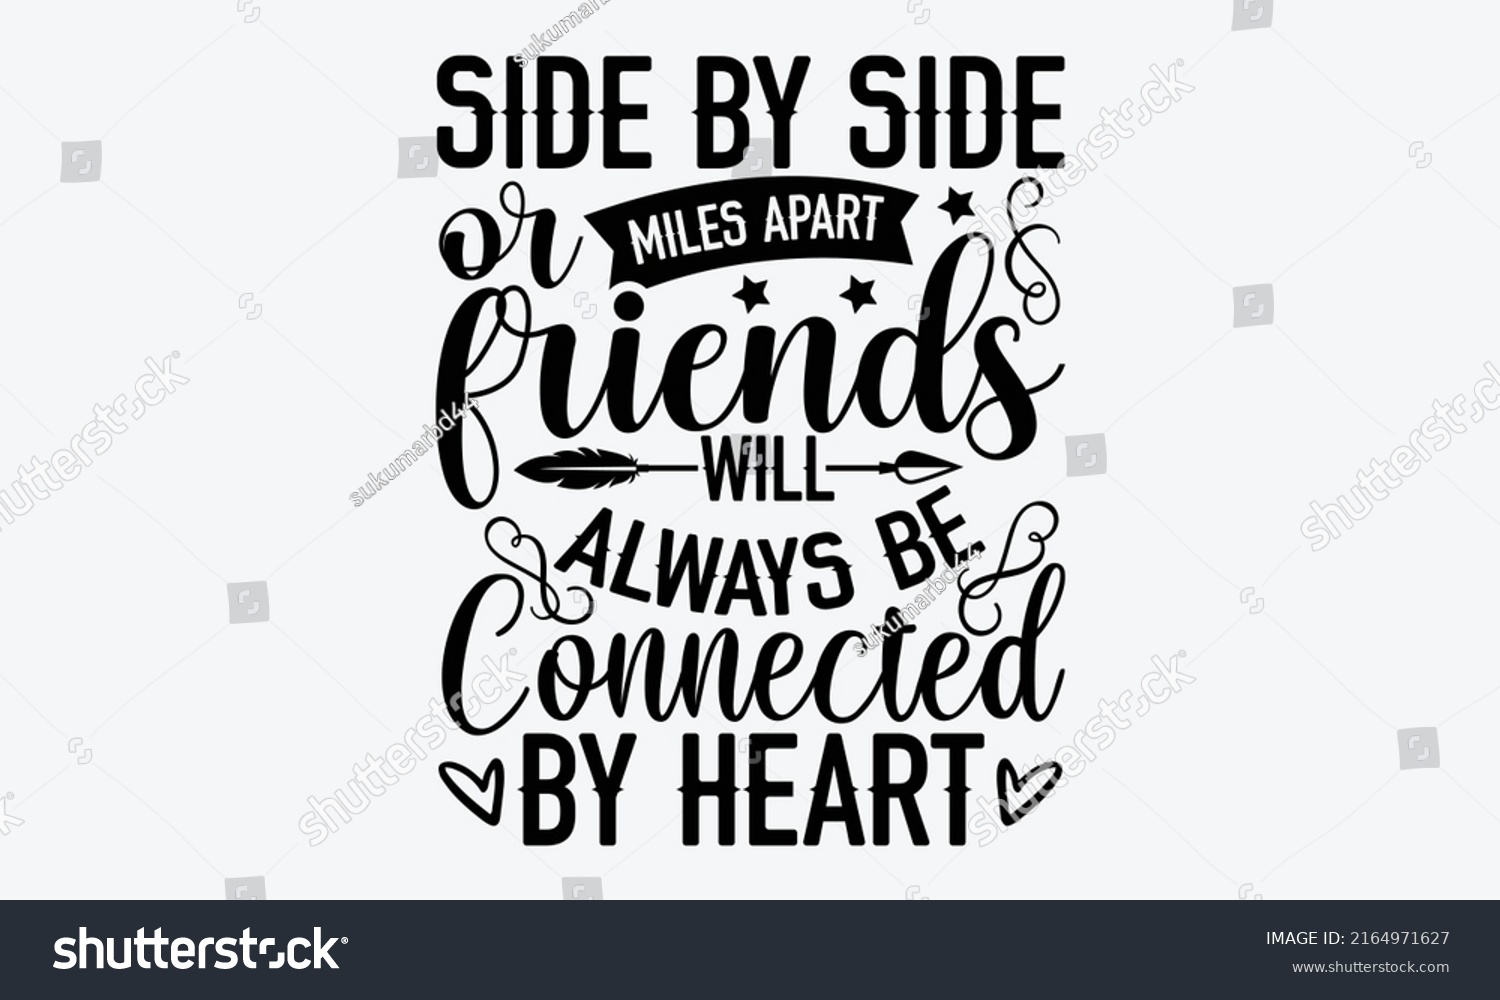 SVG of Side by side or miles apart friends Will always be connected by heart - Best Friends t shirt design, Hand drawn lettering phrase, Calligraphy graphic design, SVG Files for Cutting Cricut and Silhouett svg